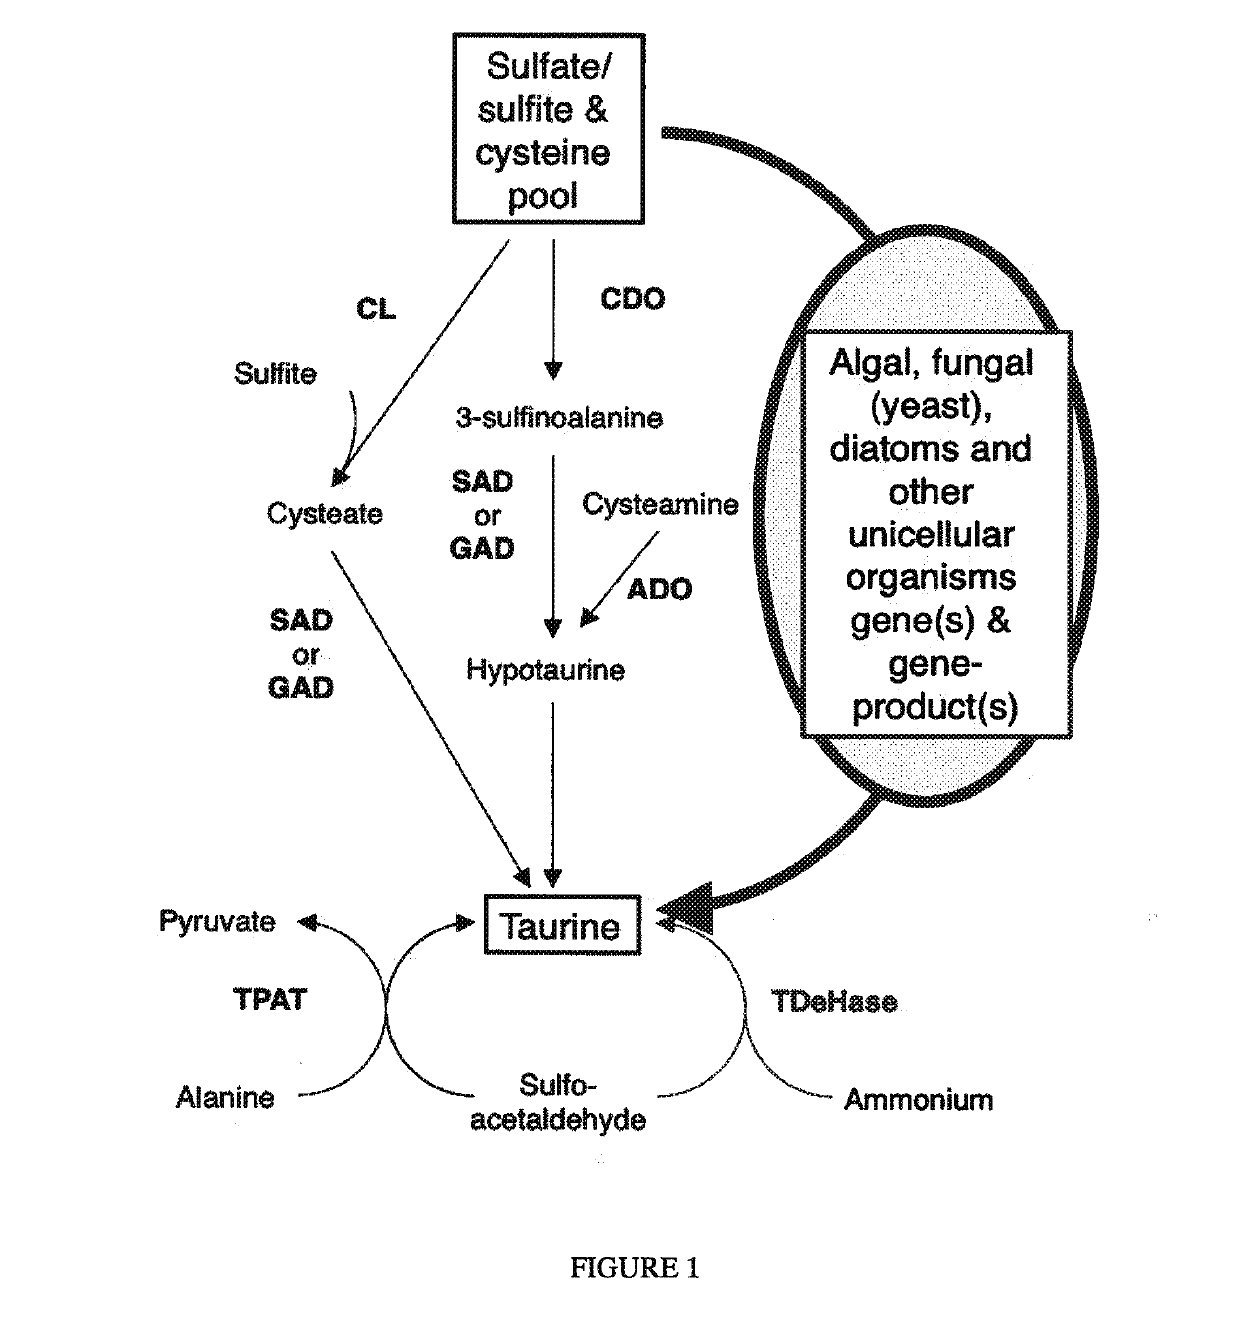 Algal and fungal genes and their uses for taurine biosynthesis in cells